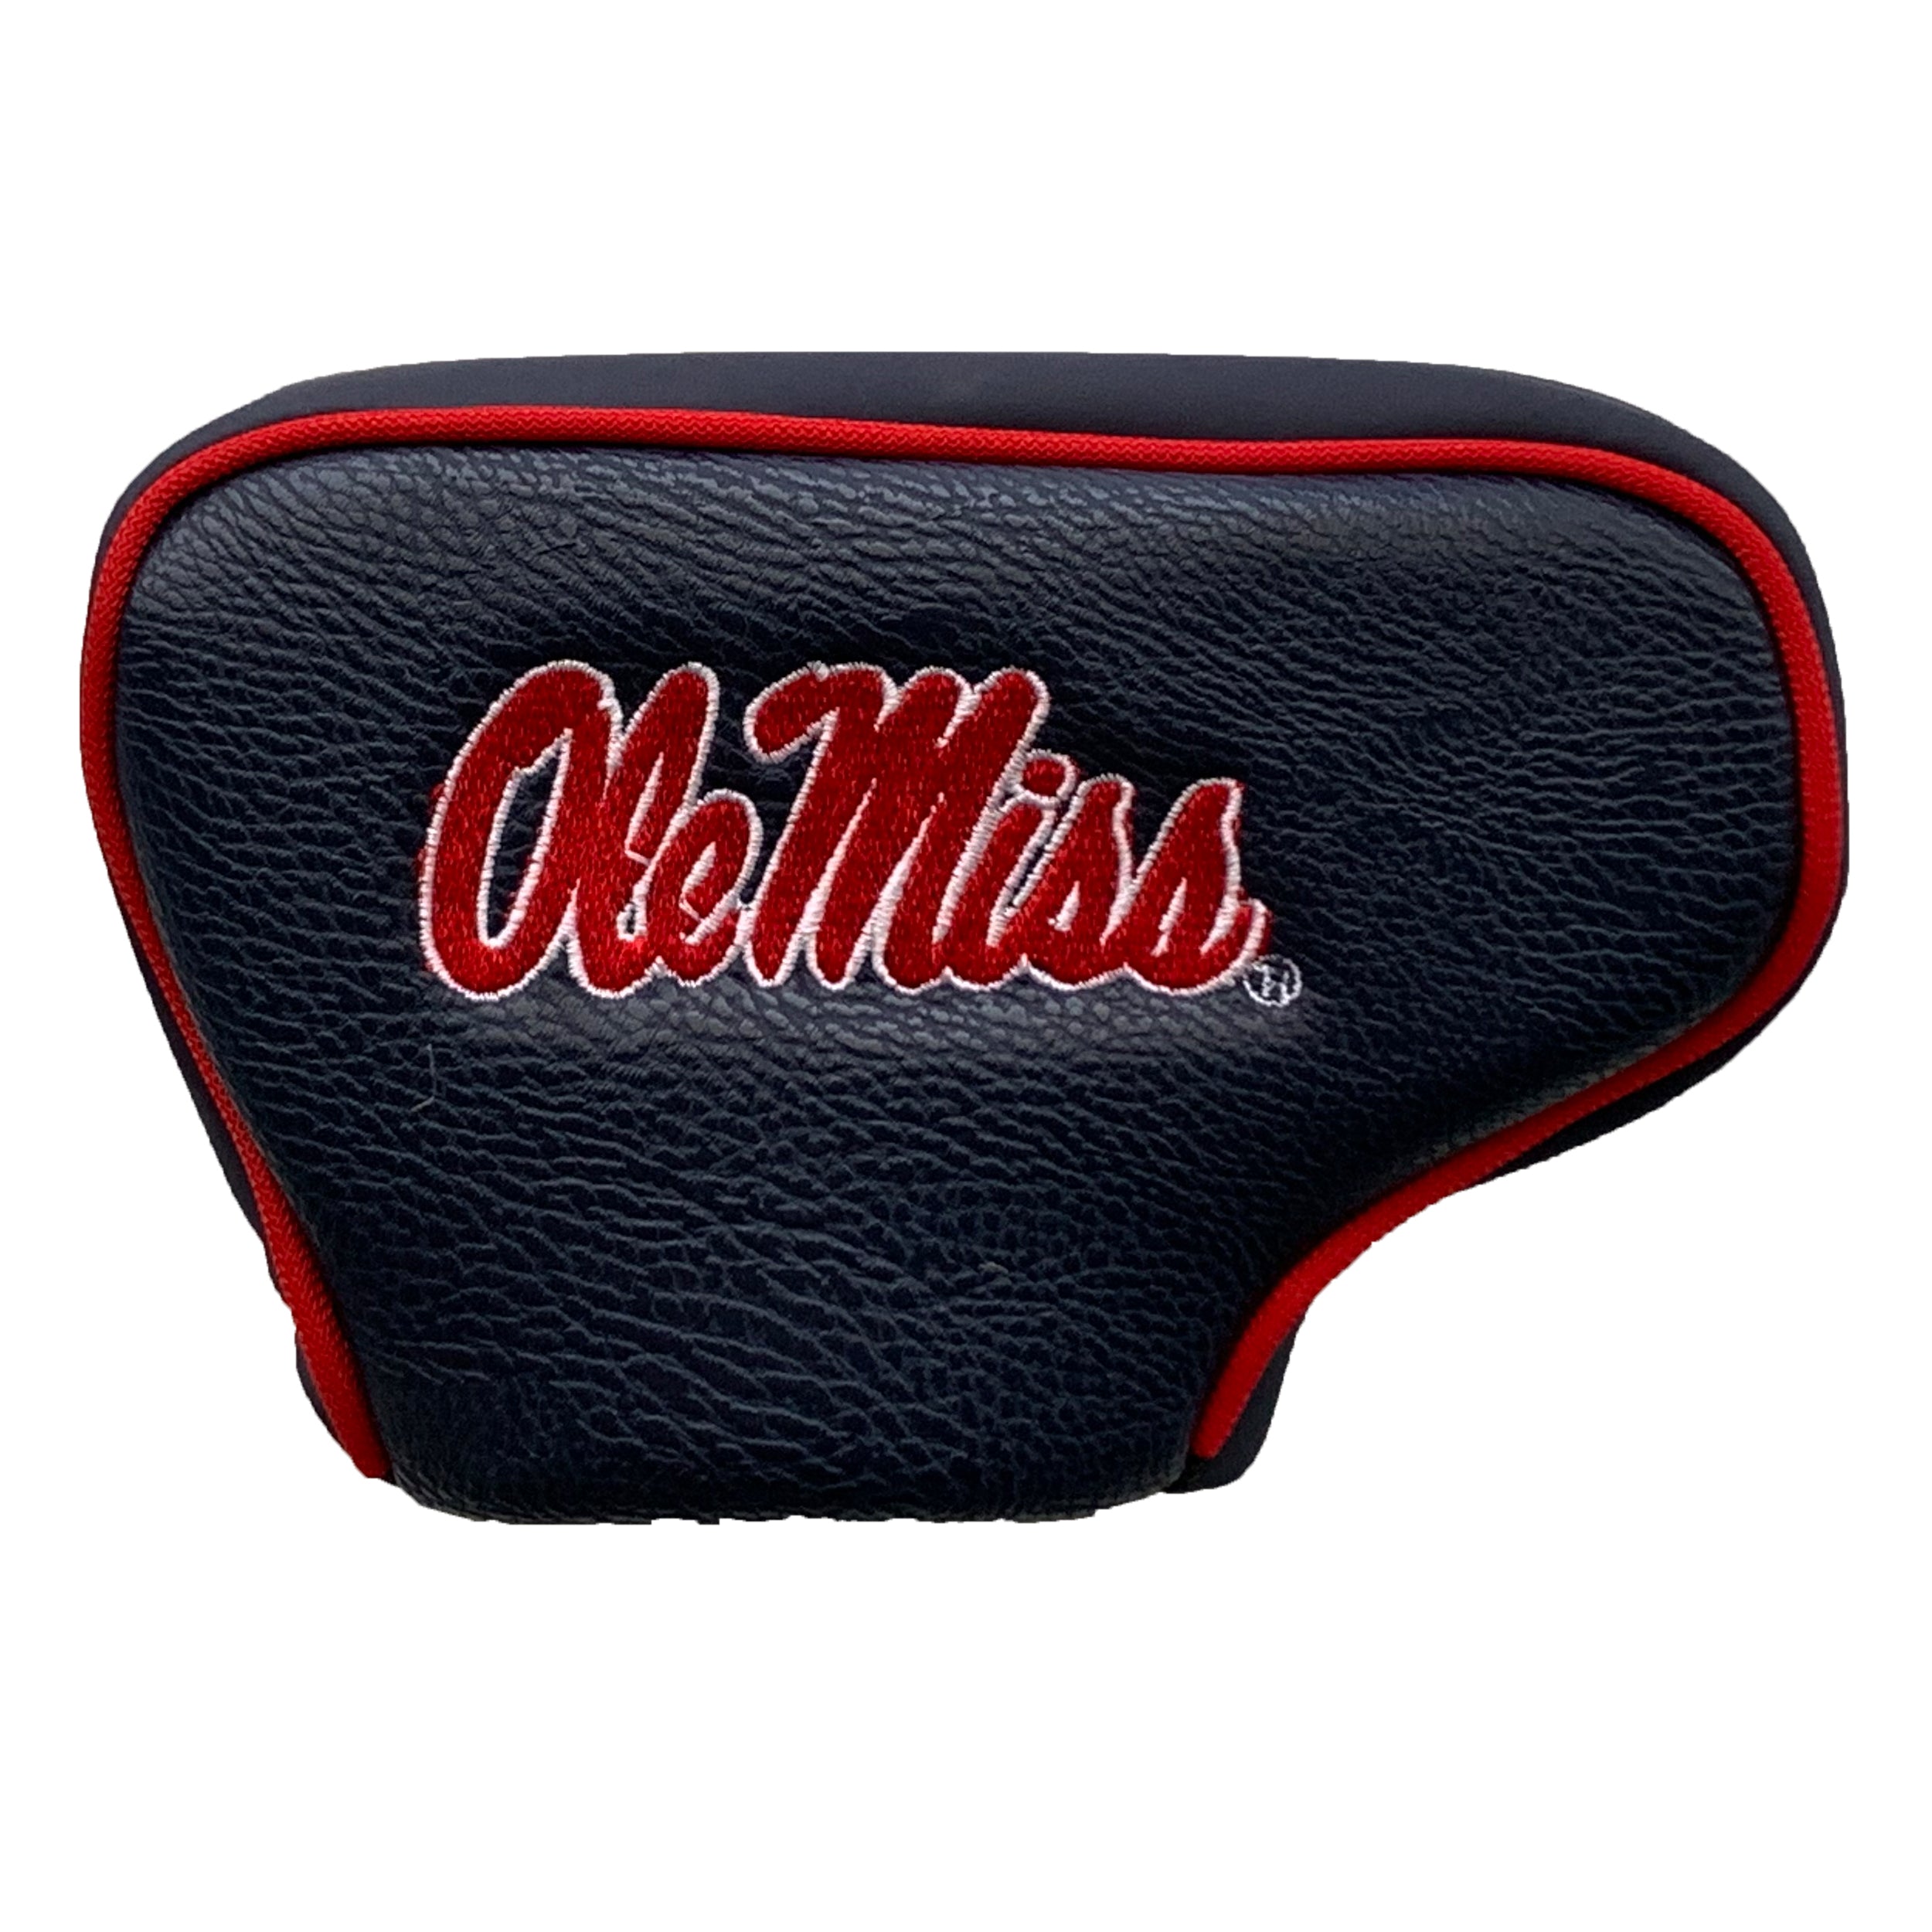 Ole Miss Rebels Blade Putter Cover